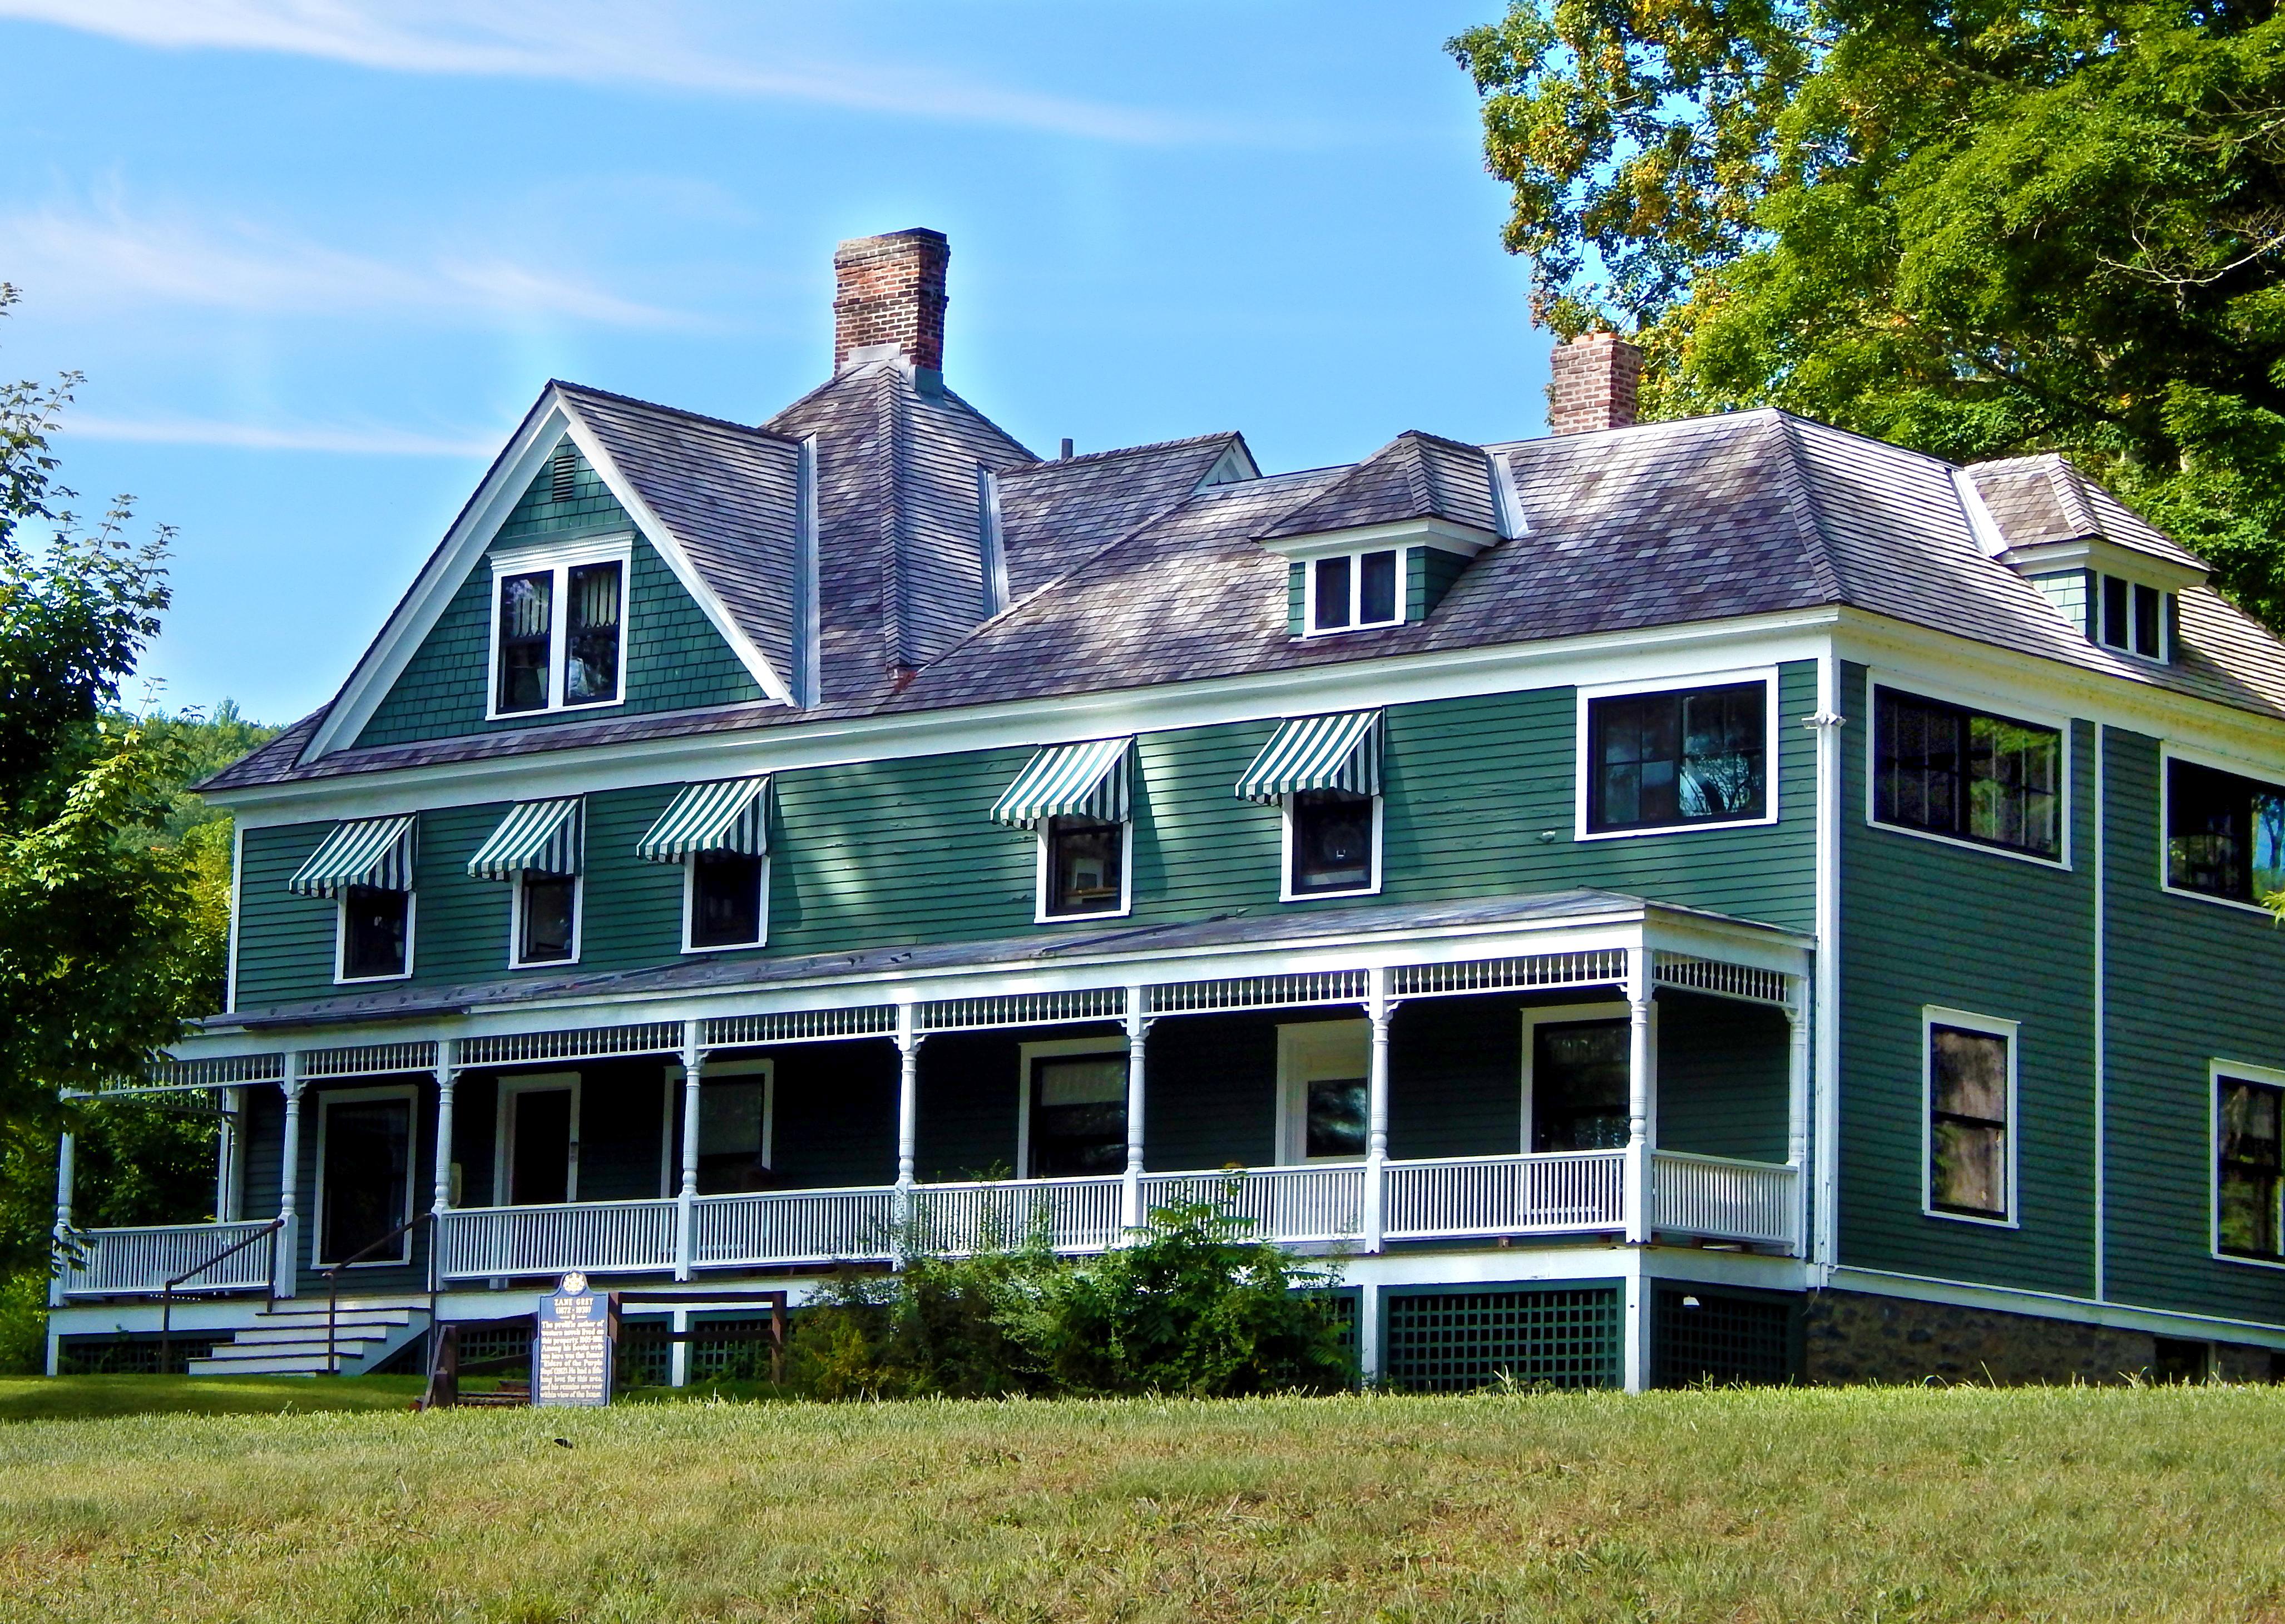 the Zane Grey Museum at Upper Delaware Scenic and Recreational River